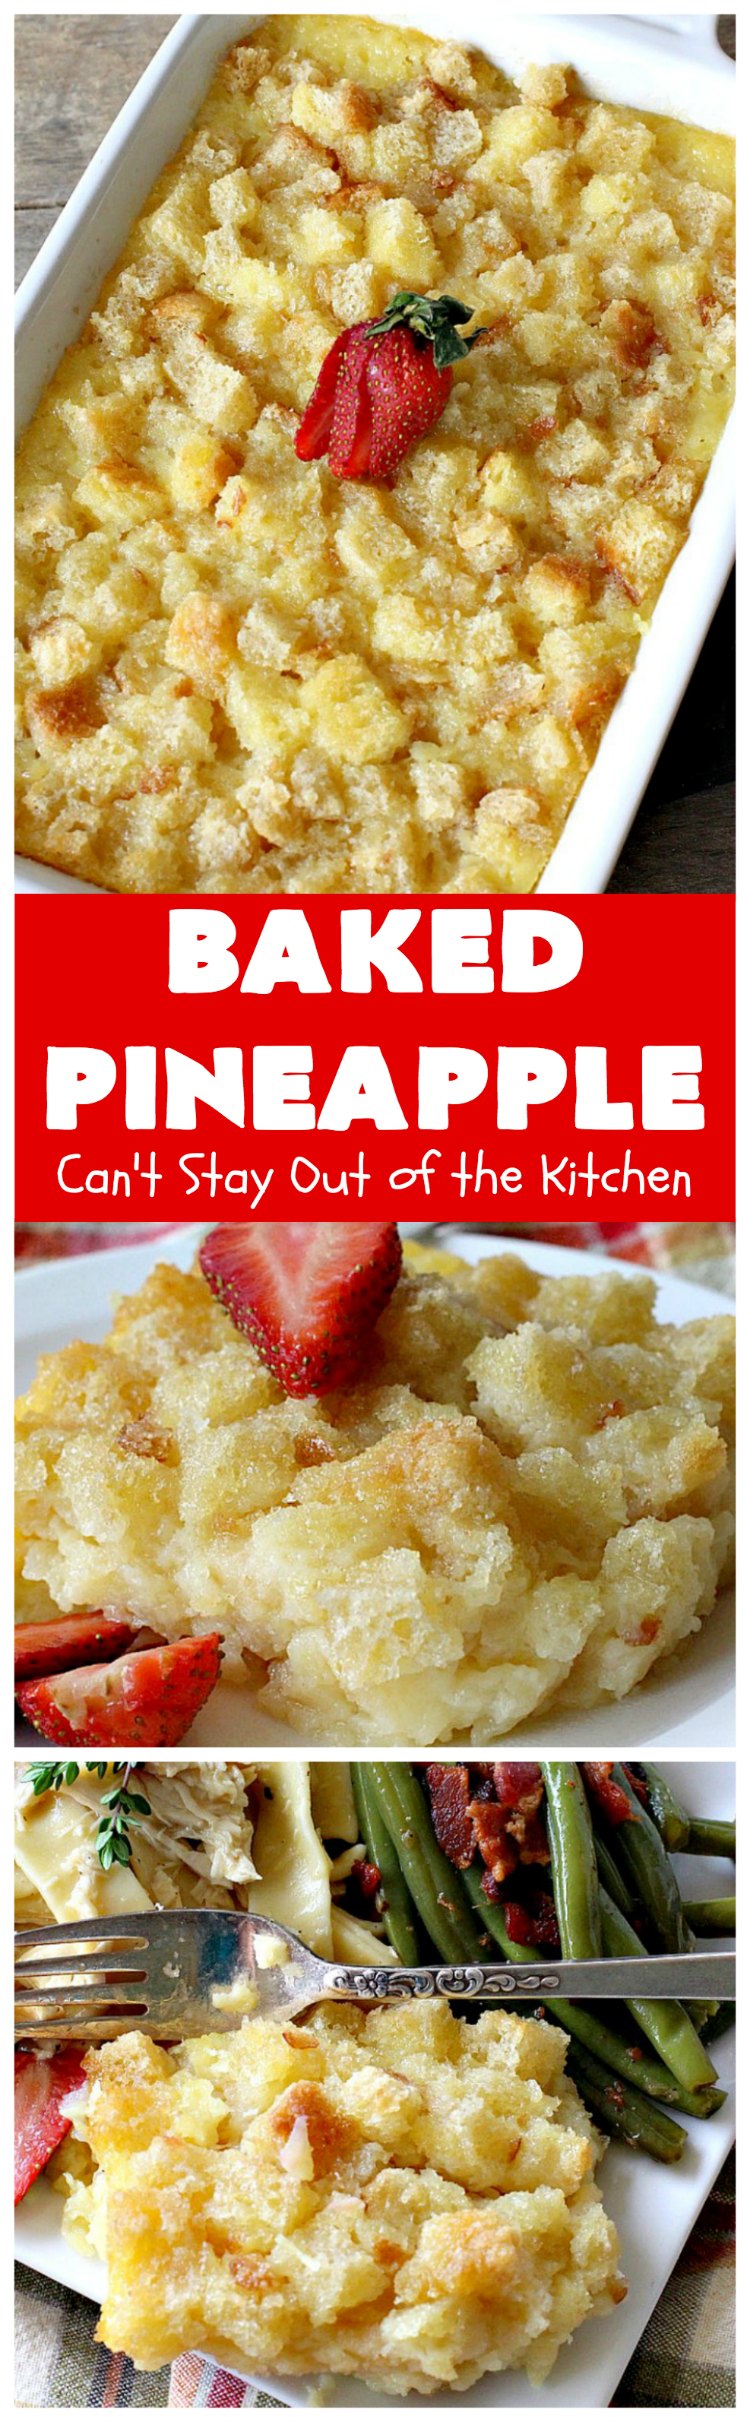 Baked Pineapple | Can't Stay Out of the Kitchen